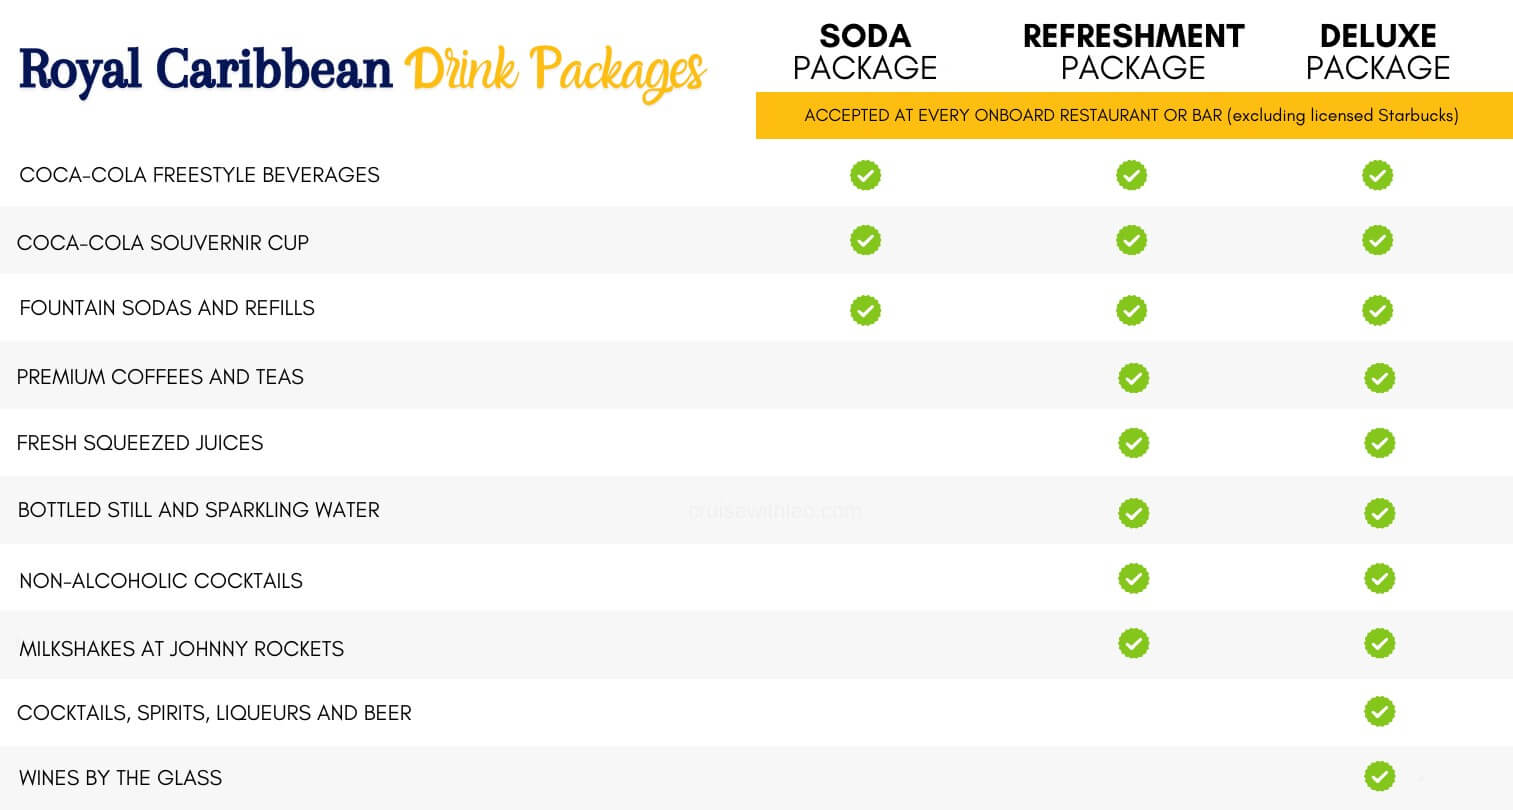 Royal Caribbean drink packages comparison chart